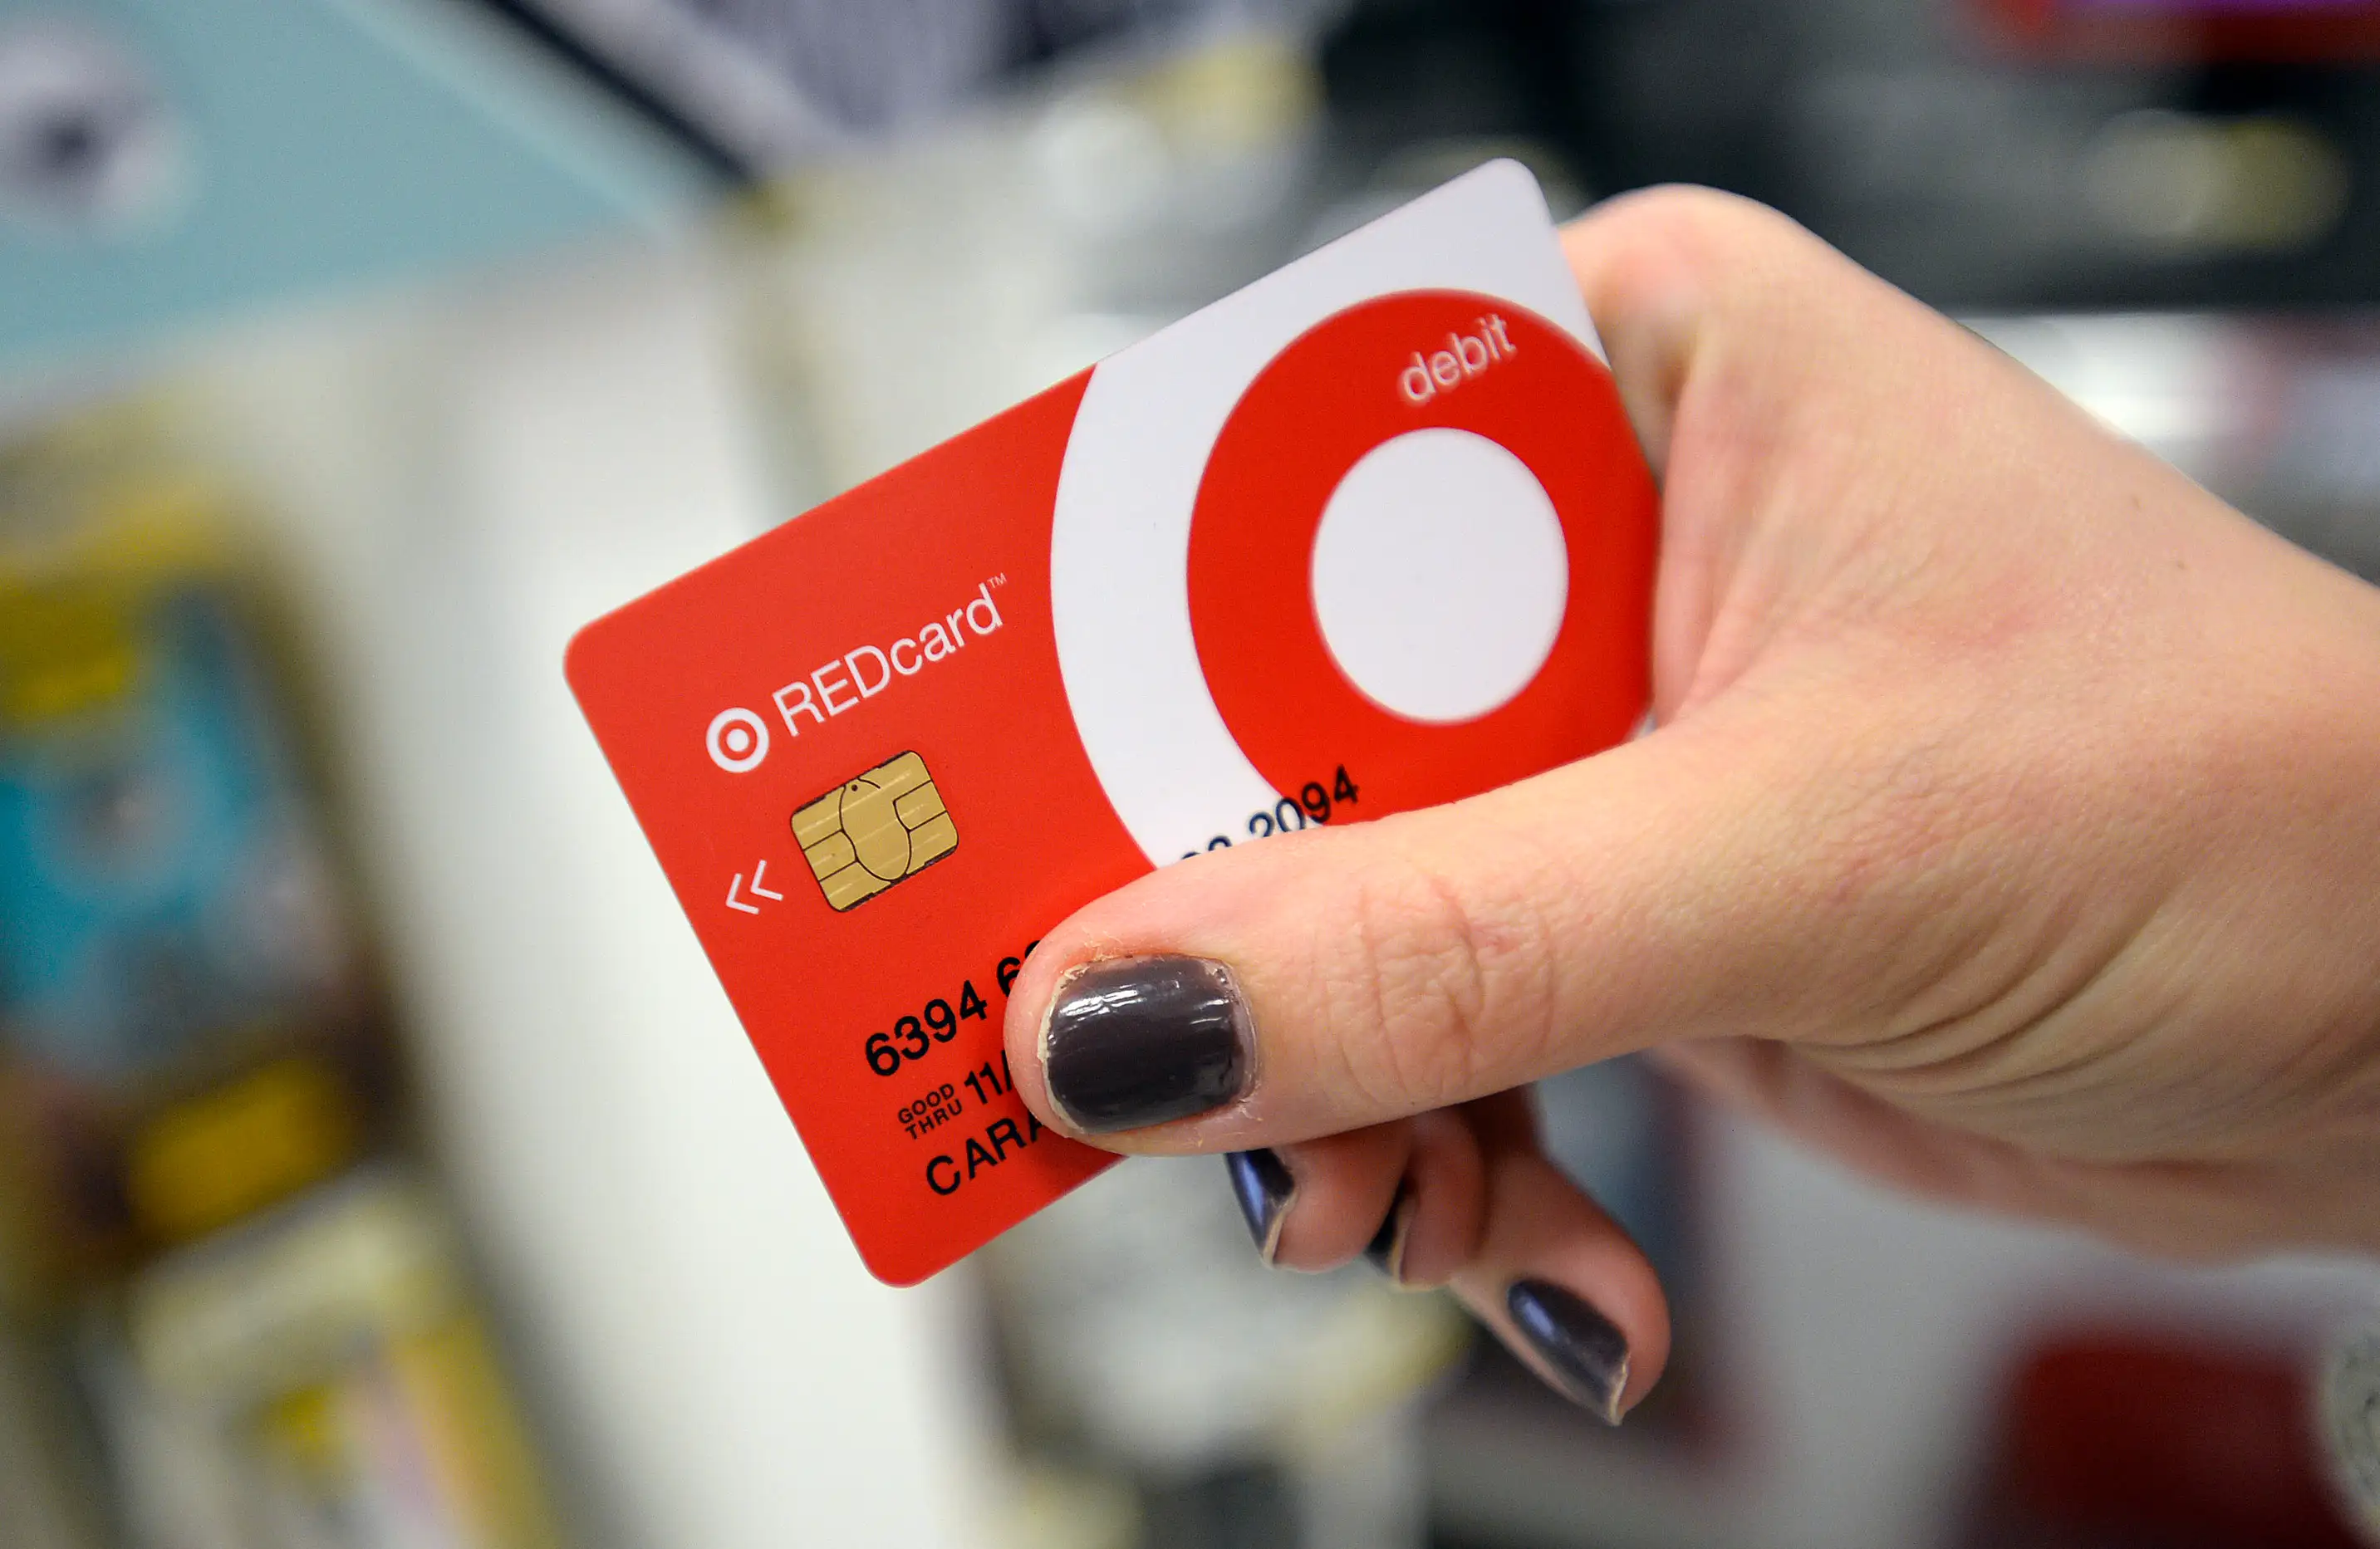 Target offers chip cards to its customers